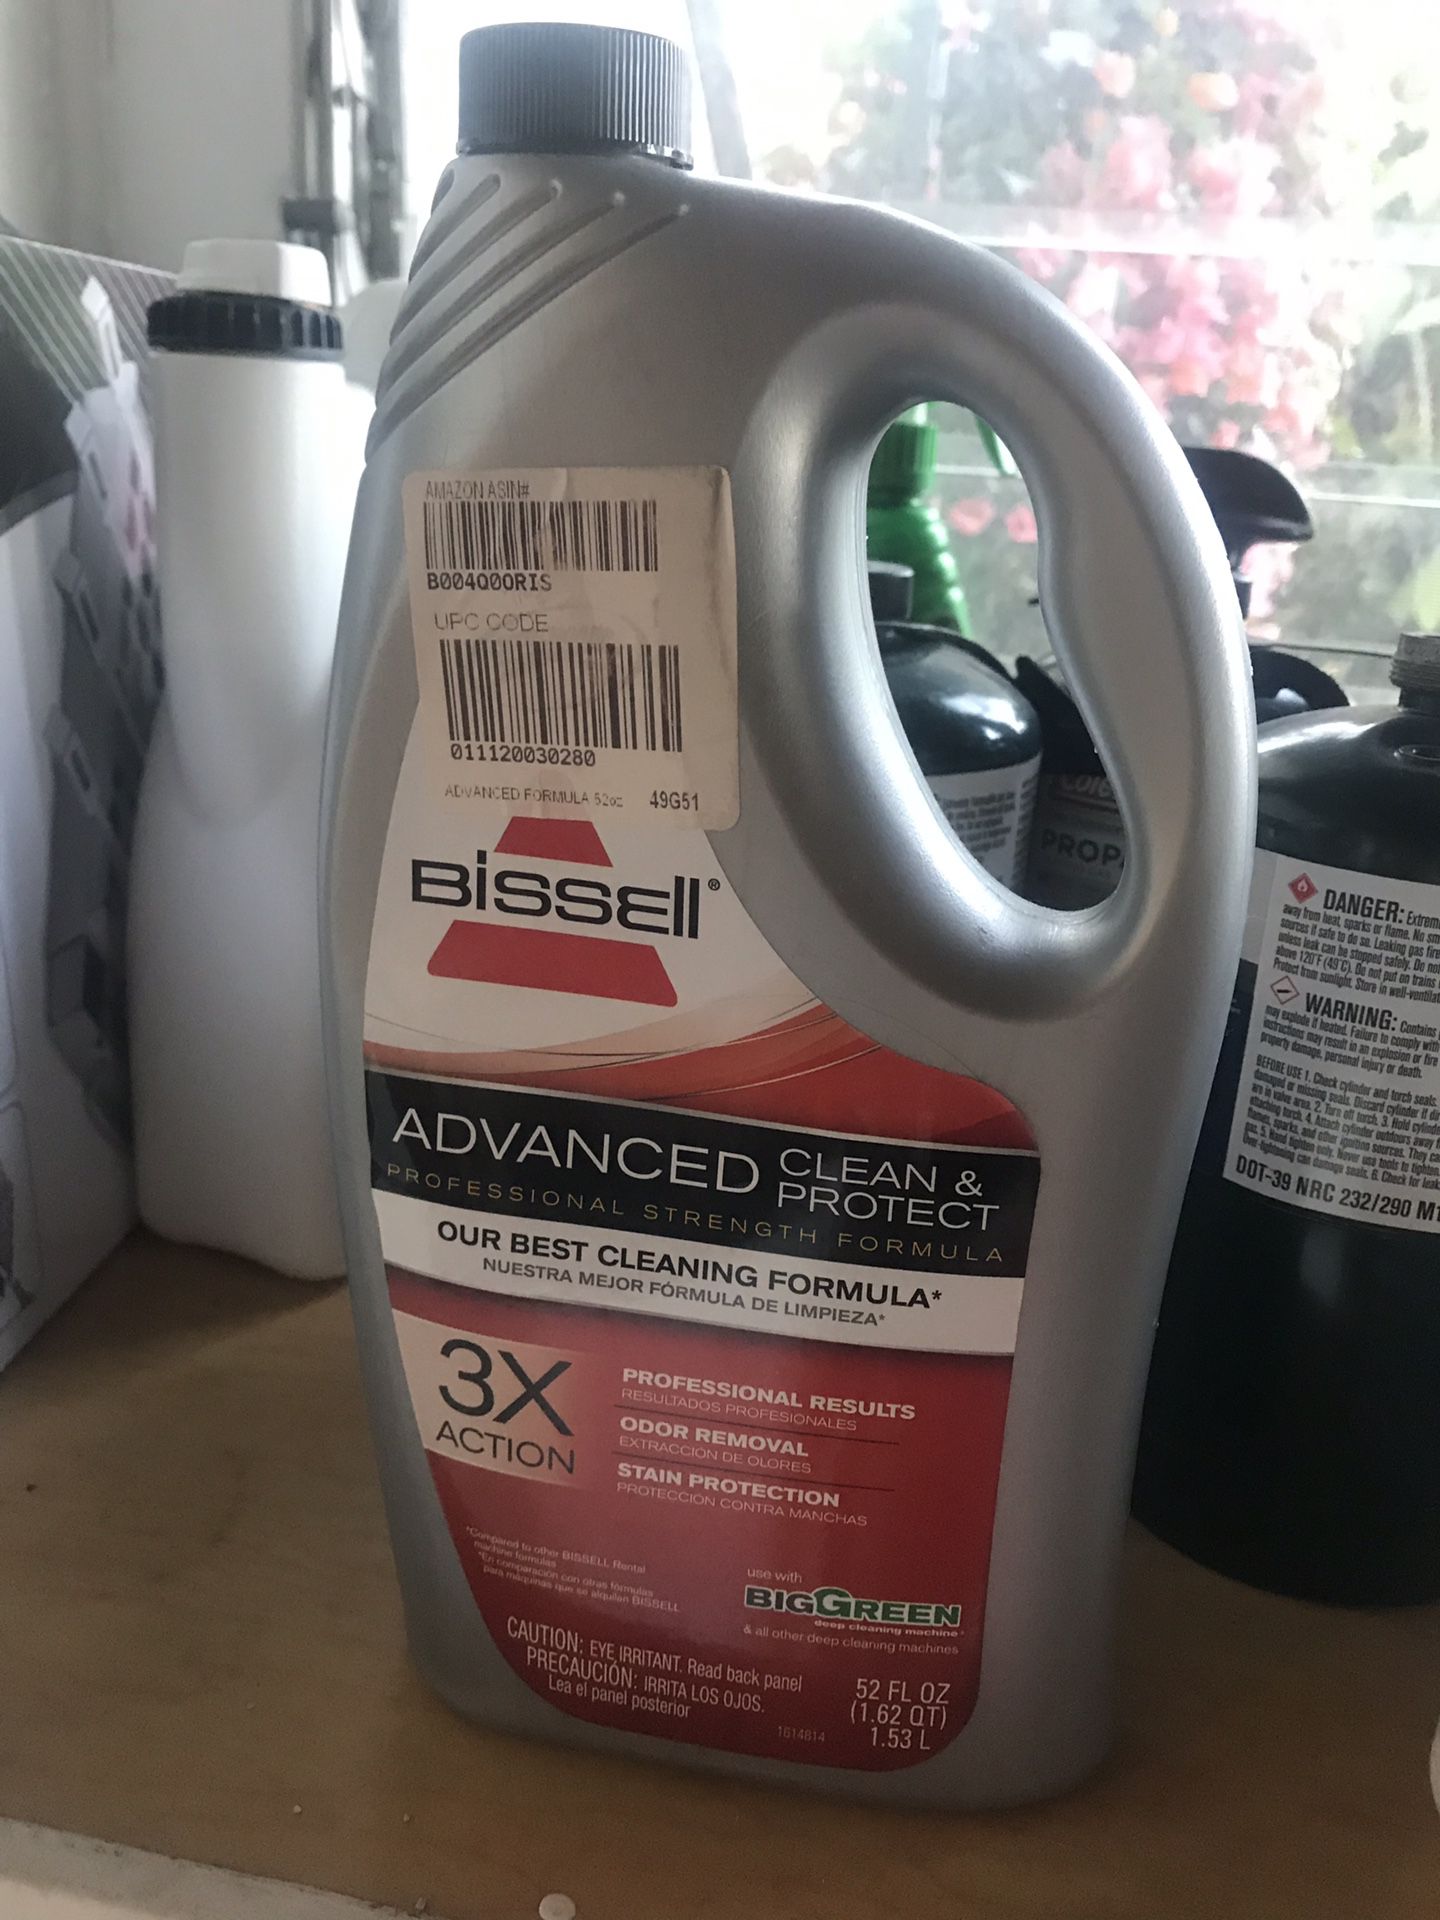 Bissell Carpet cleaner. Brand new, unopened